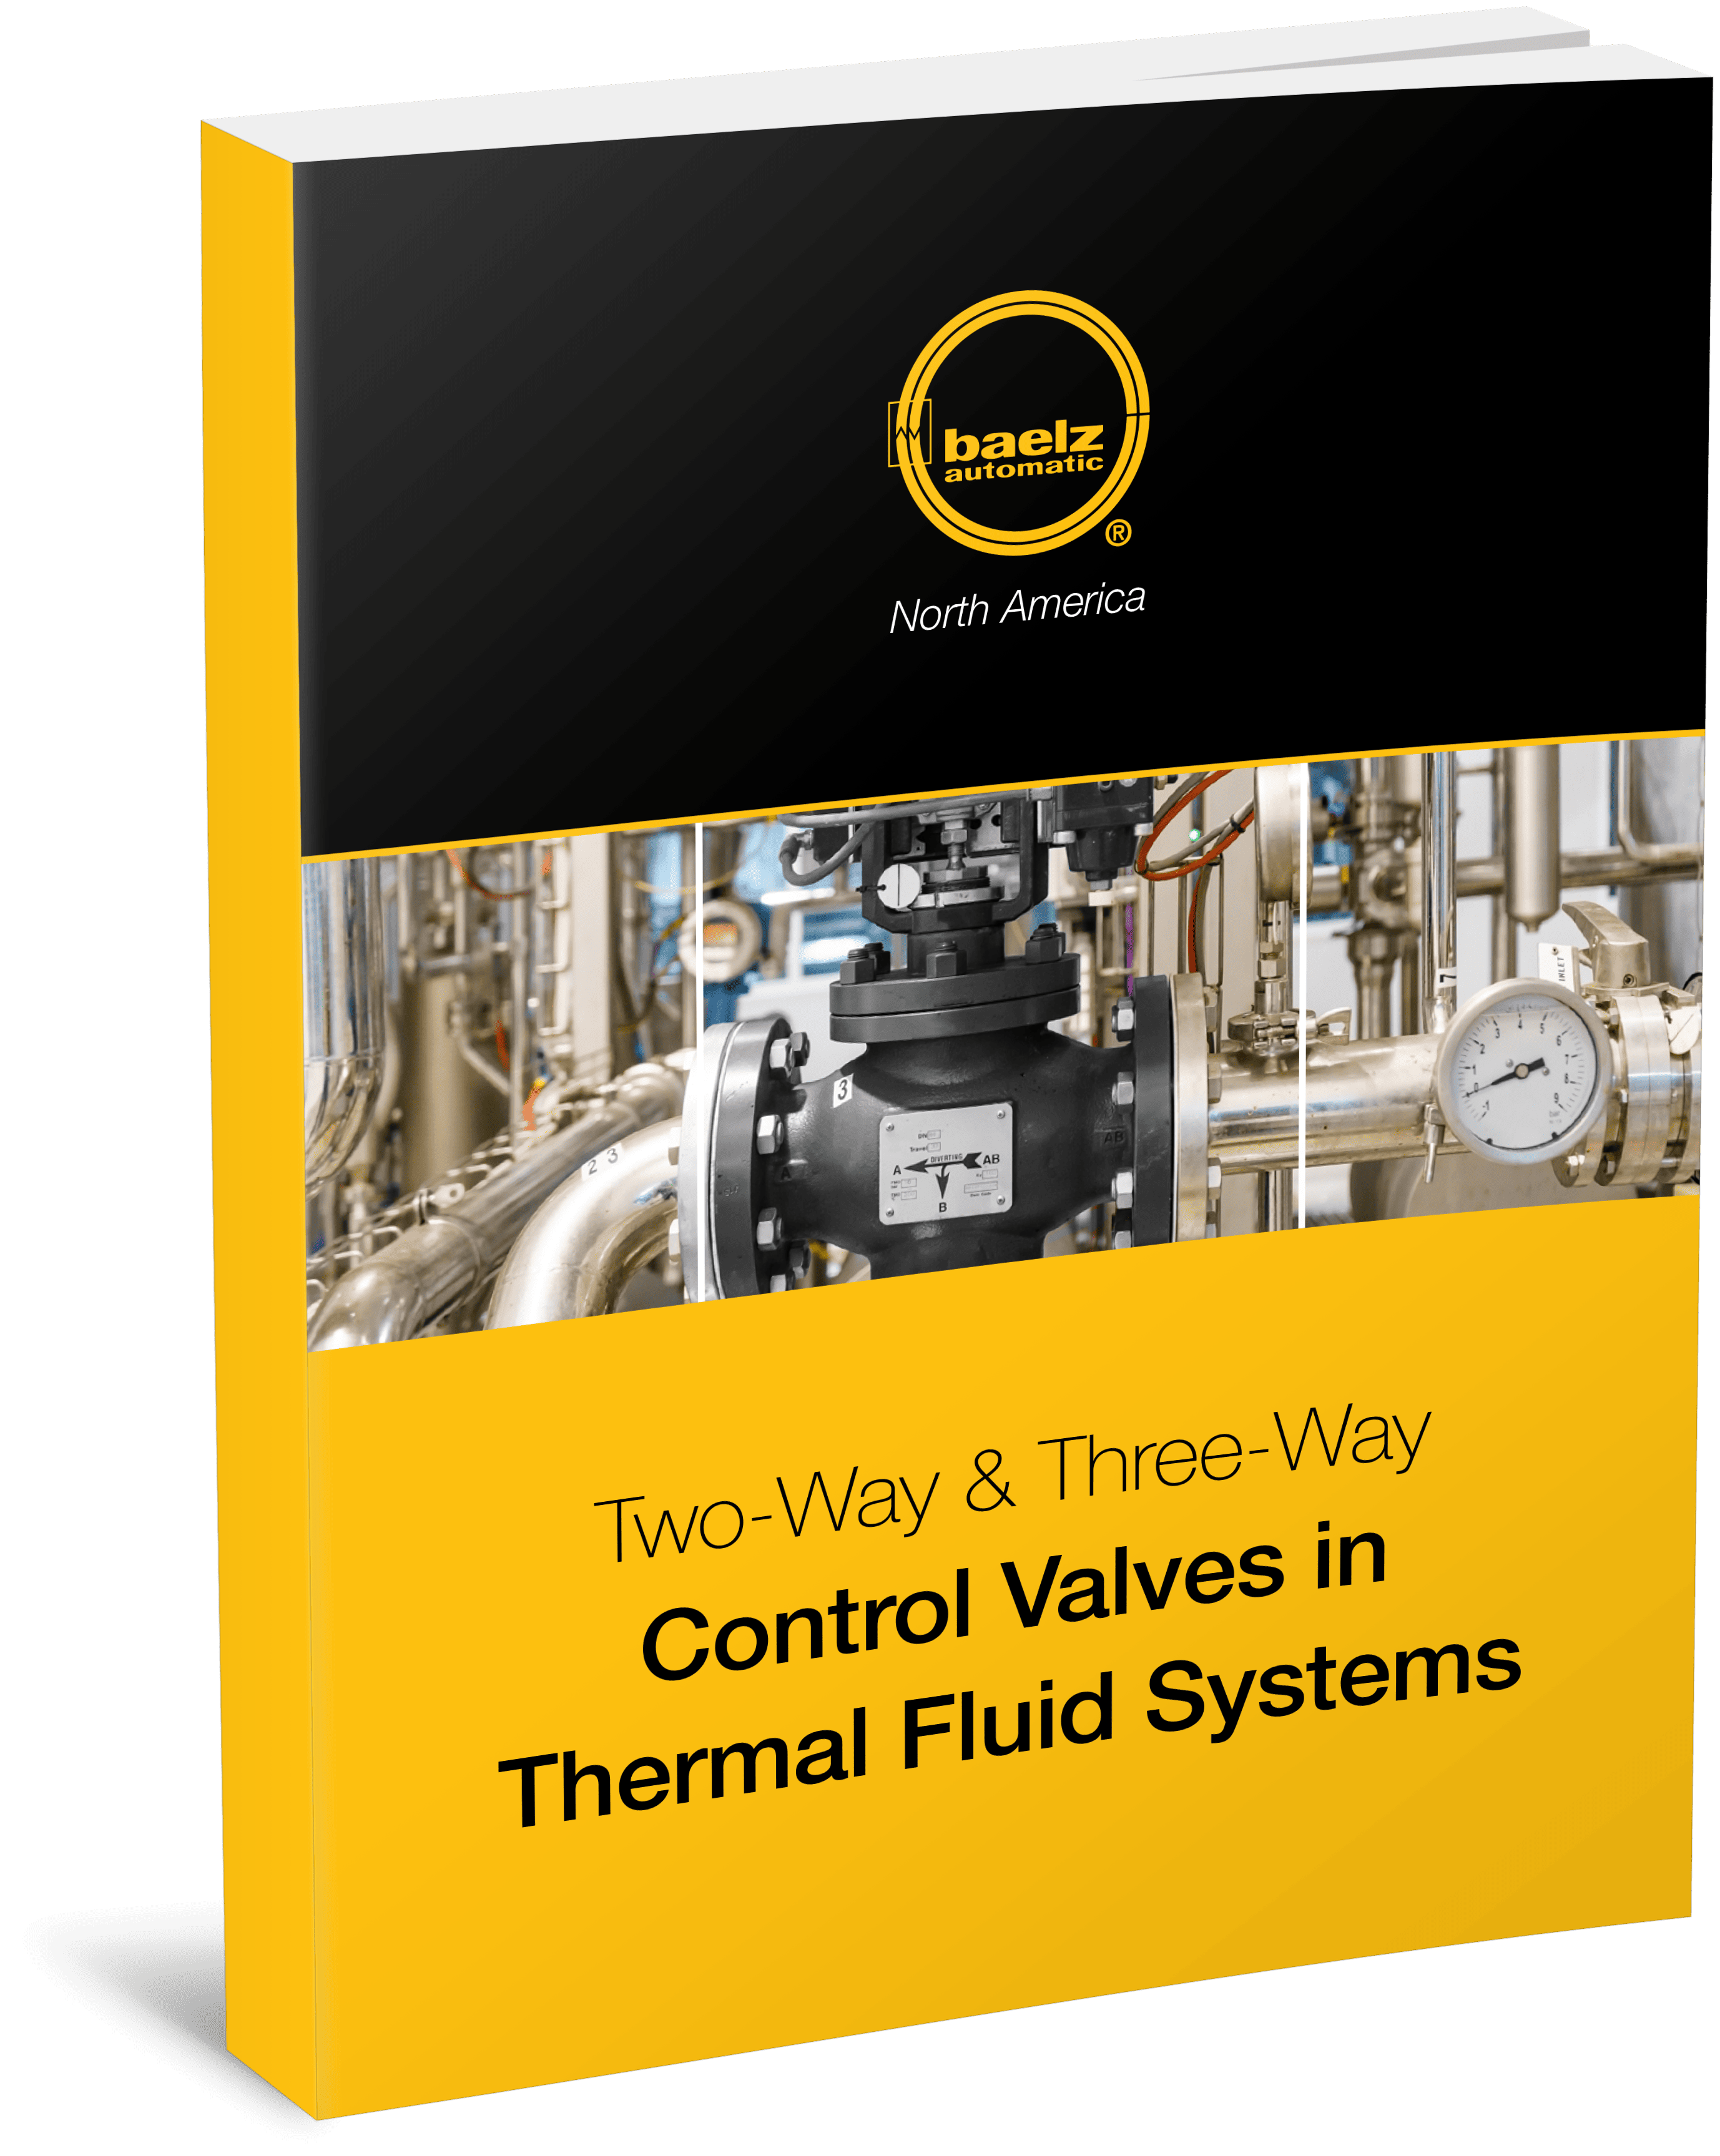 Two Way & Three Way Control Valves in Thermal Fluid Systems